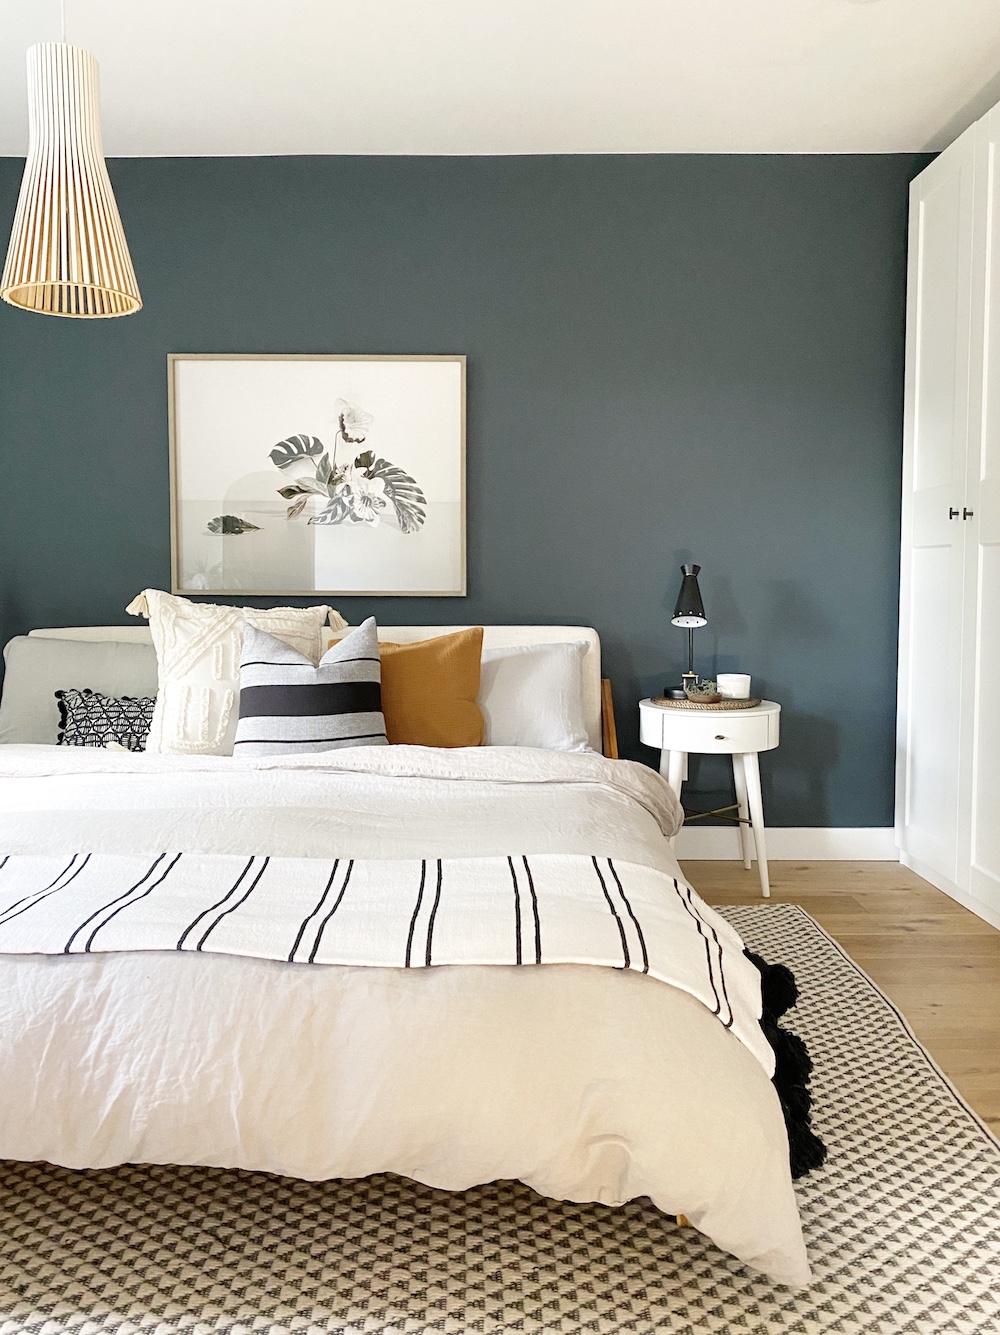 Beautiful bedroom designed and styled by The Property Stylist Inc. with a grey green painted feature wall behind a large white bed stacked with pillows, large pendant lamp, a geometric print rug and wood floors